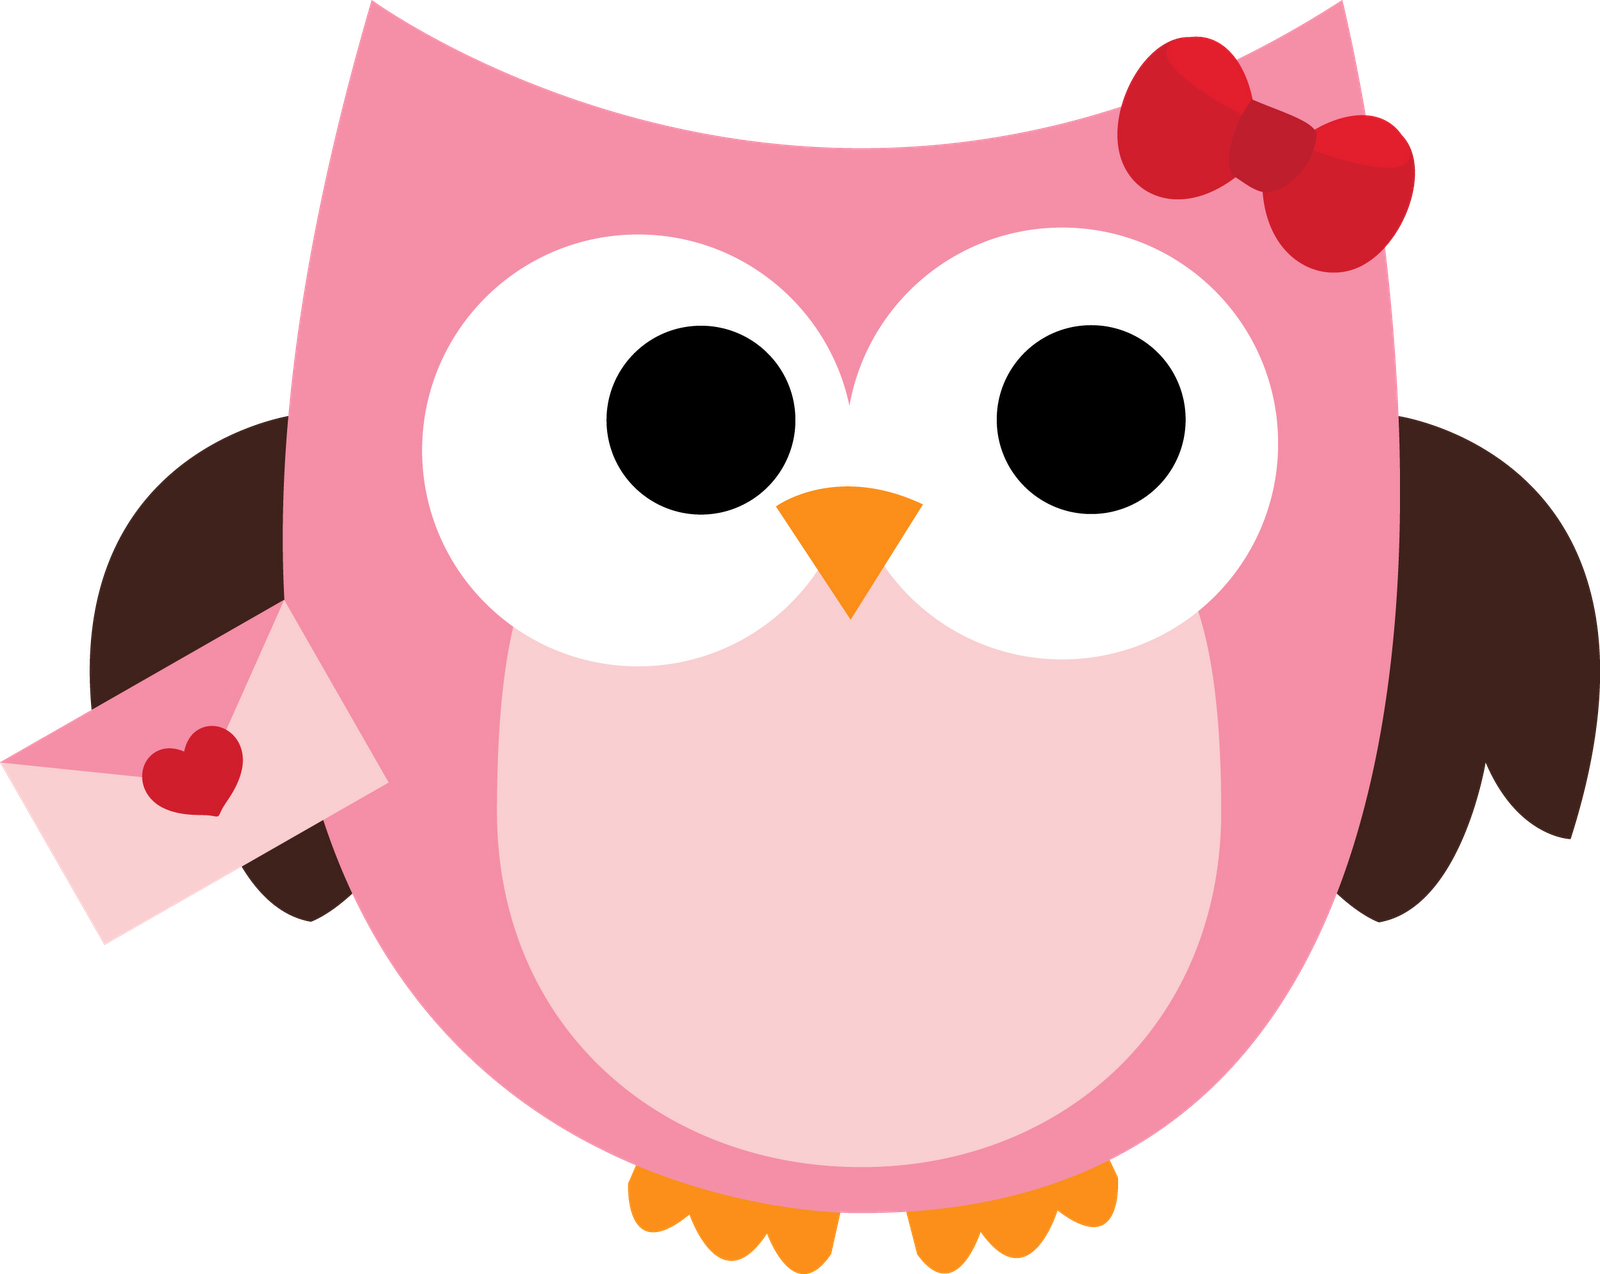 Images of Owl Valentines - Best Gift and Craft